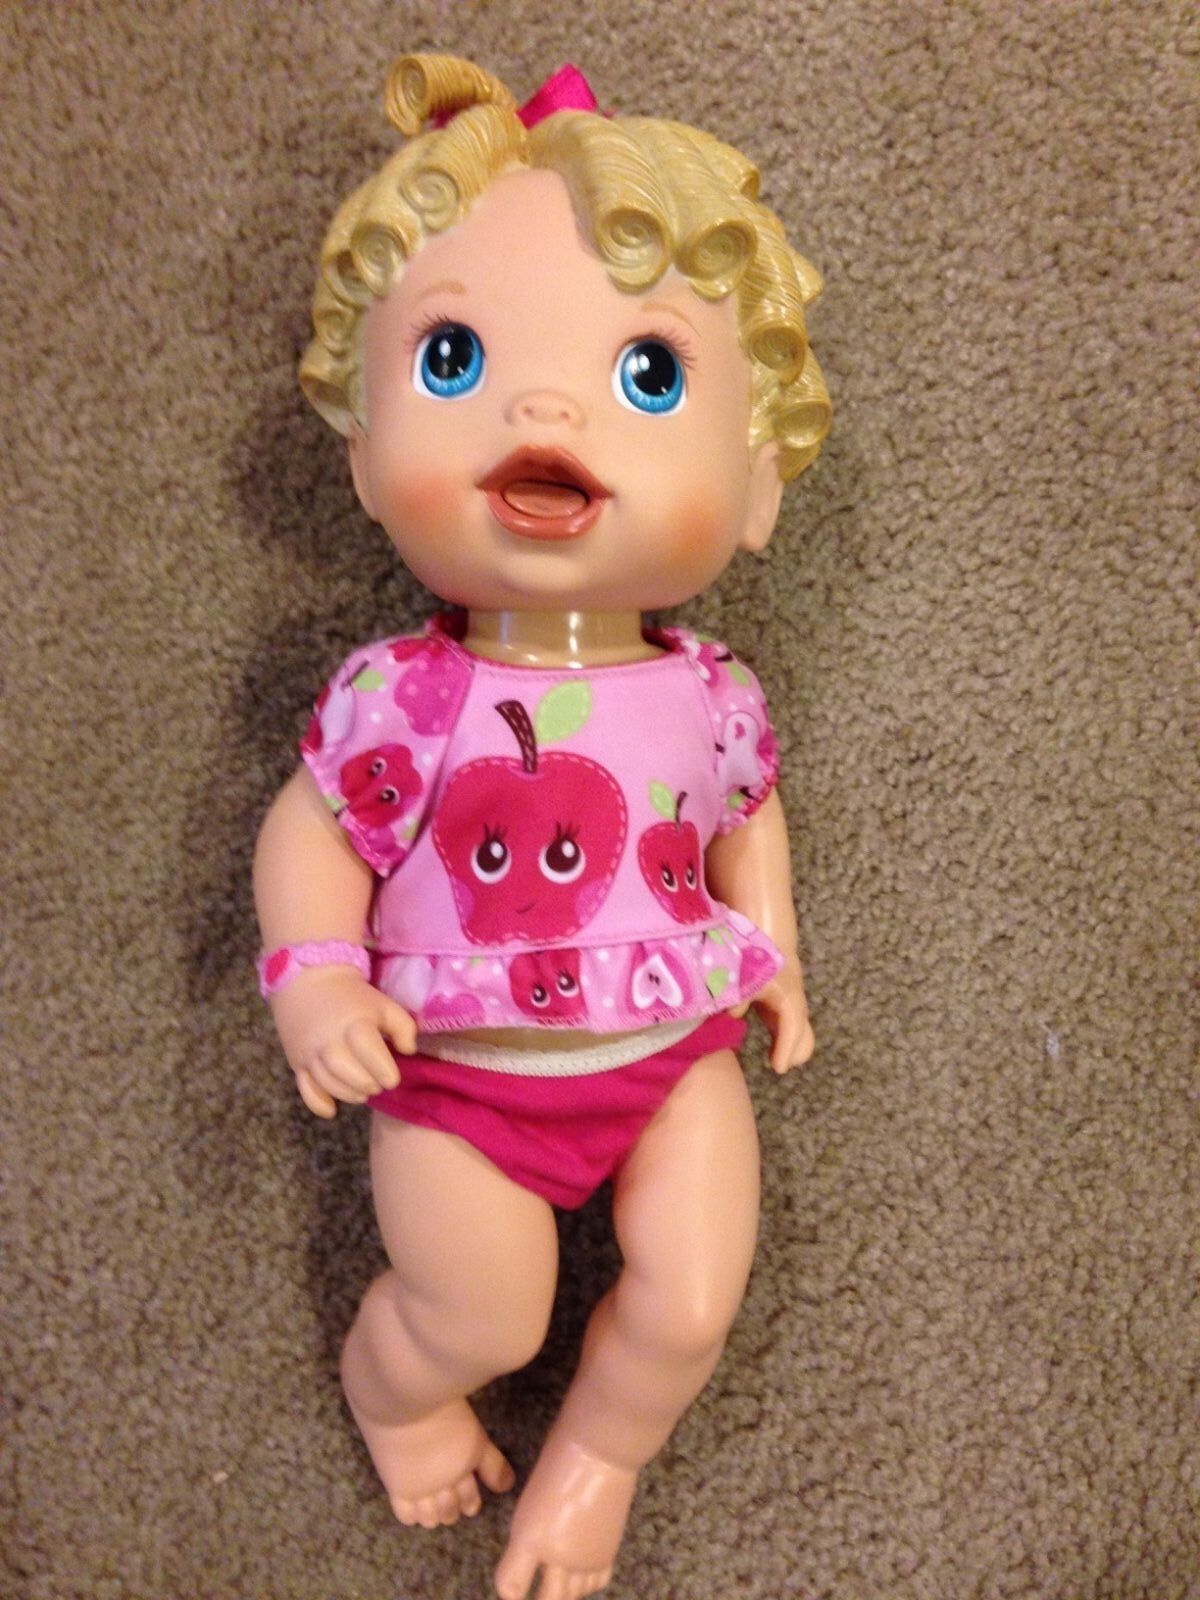 2009 Baby Alive All Gone Doll Talking Blonde Hair No Accessories Talks GREAT - $23.05